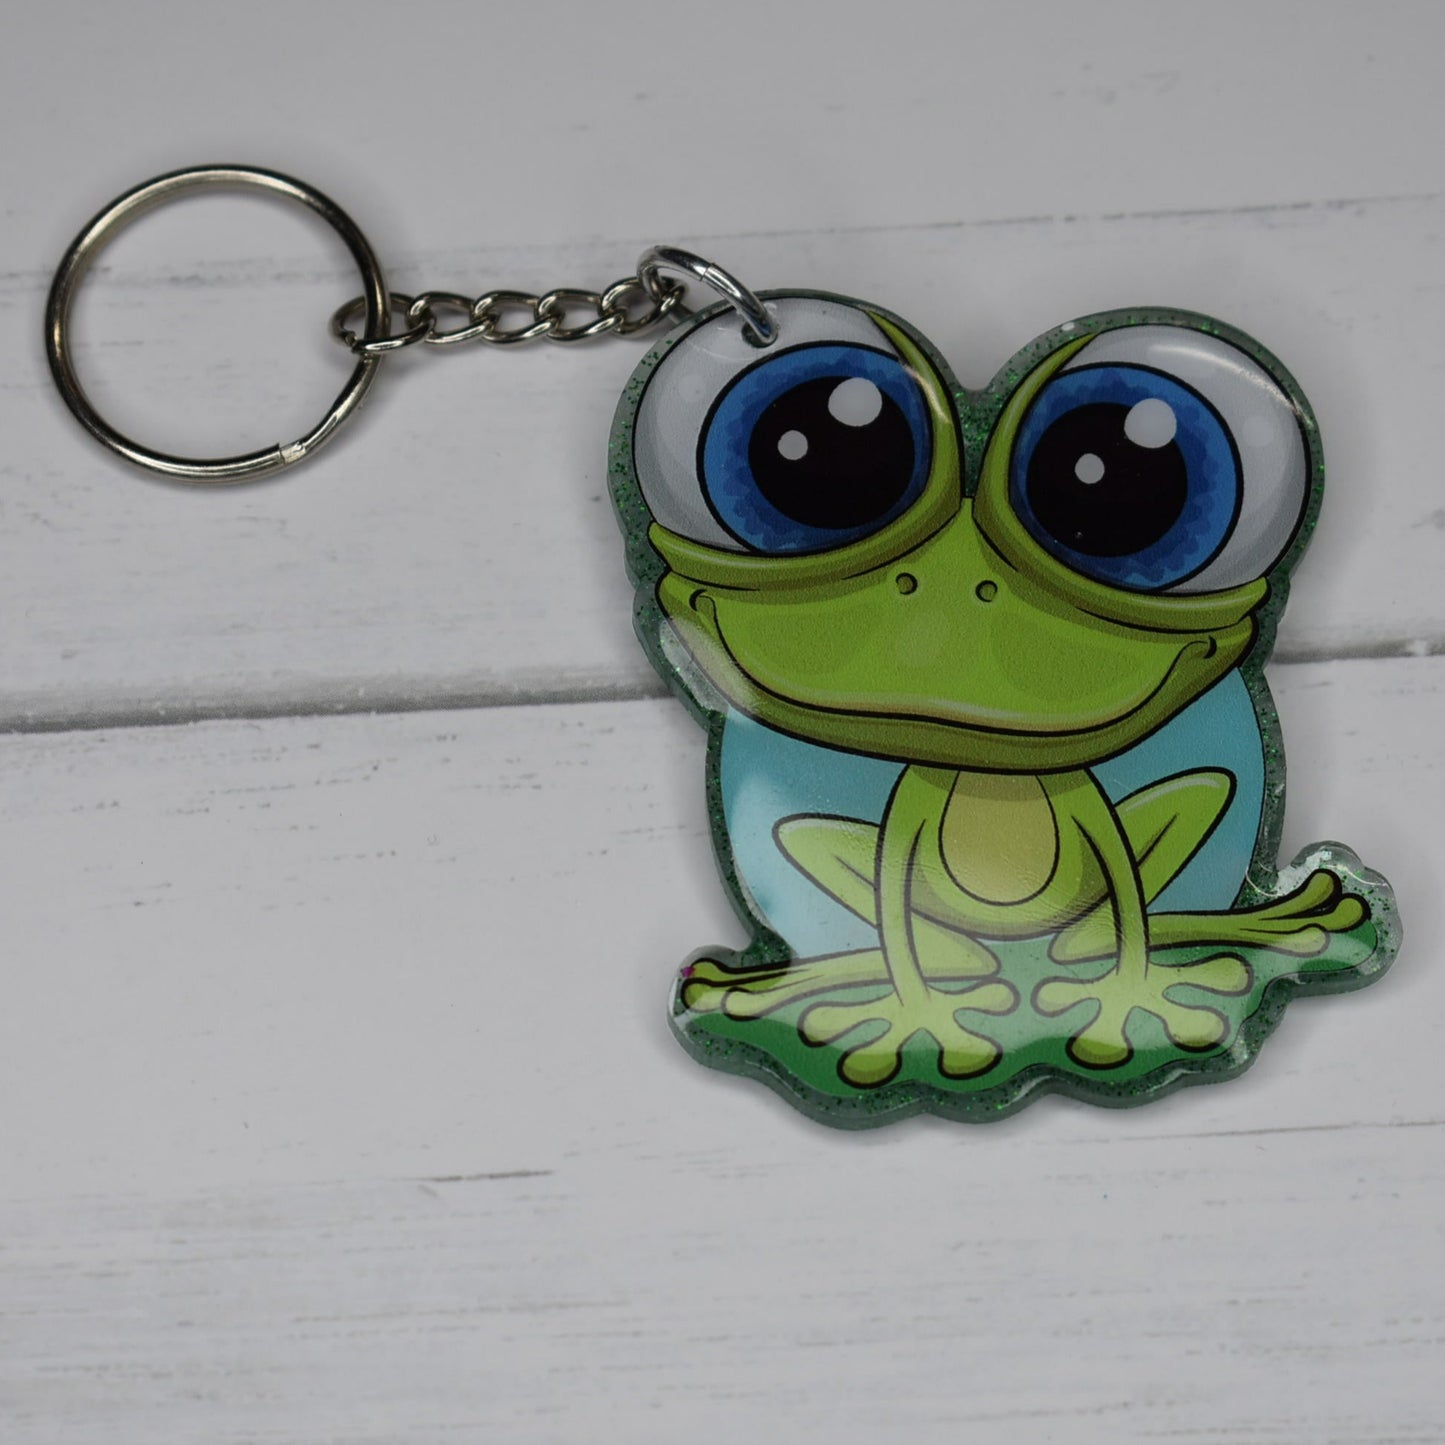 This Frog Keychain is hopping with happiness! Made from durable acrylic resin he comes with a green glitter background and a great happy smile. Available in 2 sizes. Small measures 1.5" x 2" and the large at 2" x 2.5".